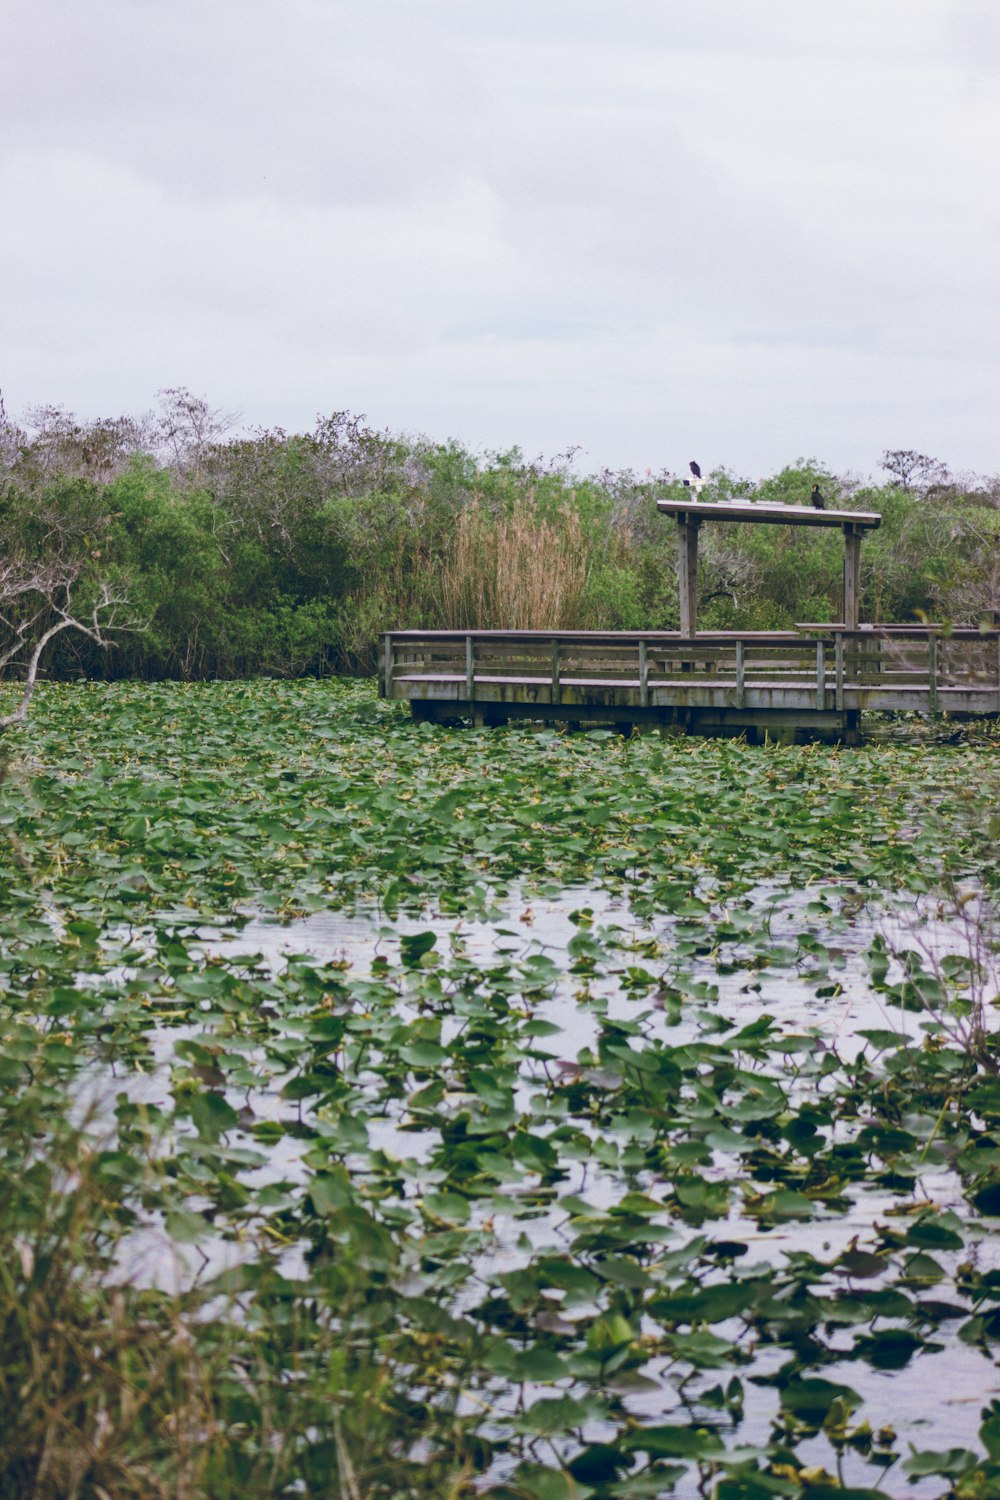 a wooden bridge over a swamp filled with water lilies